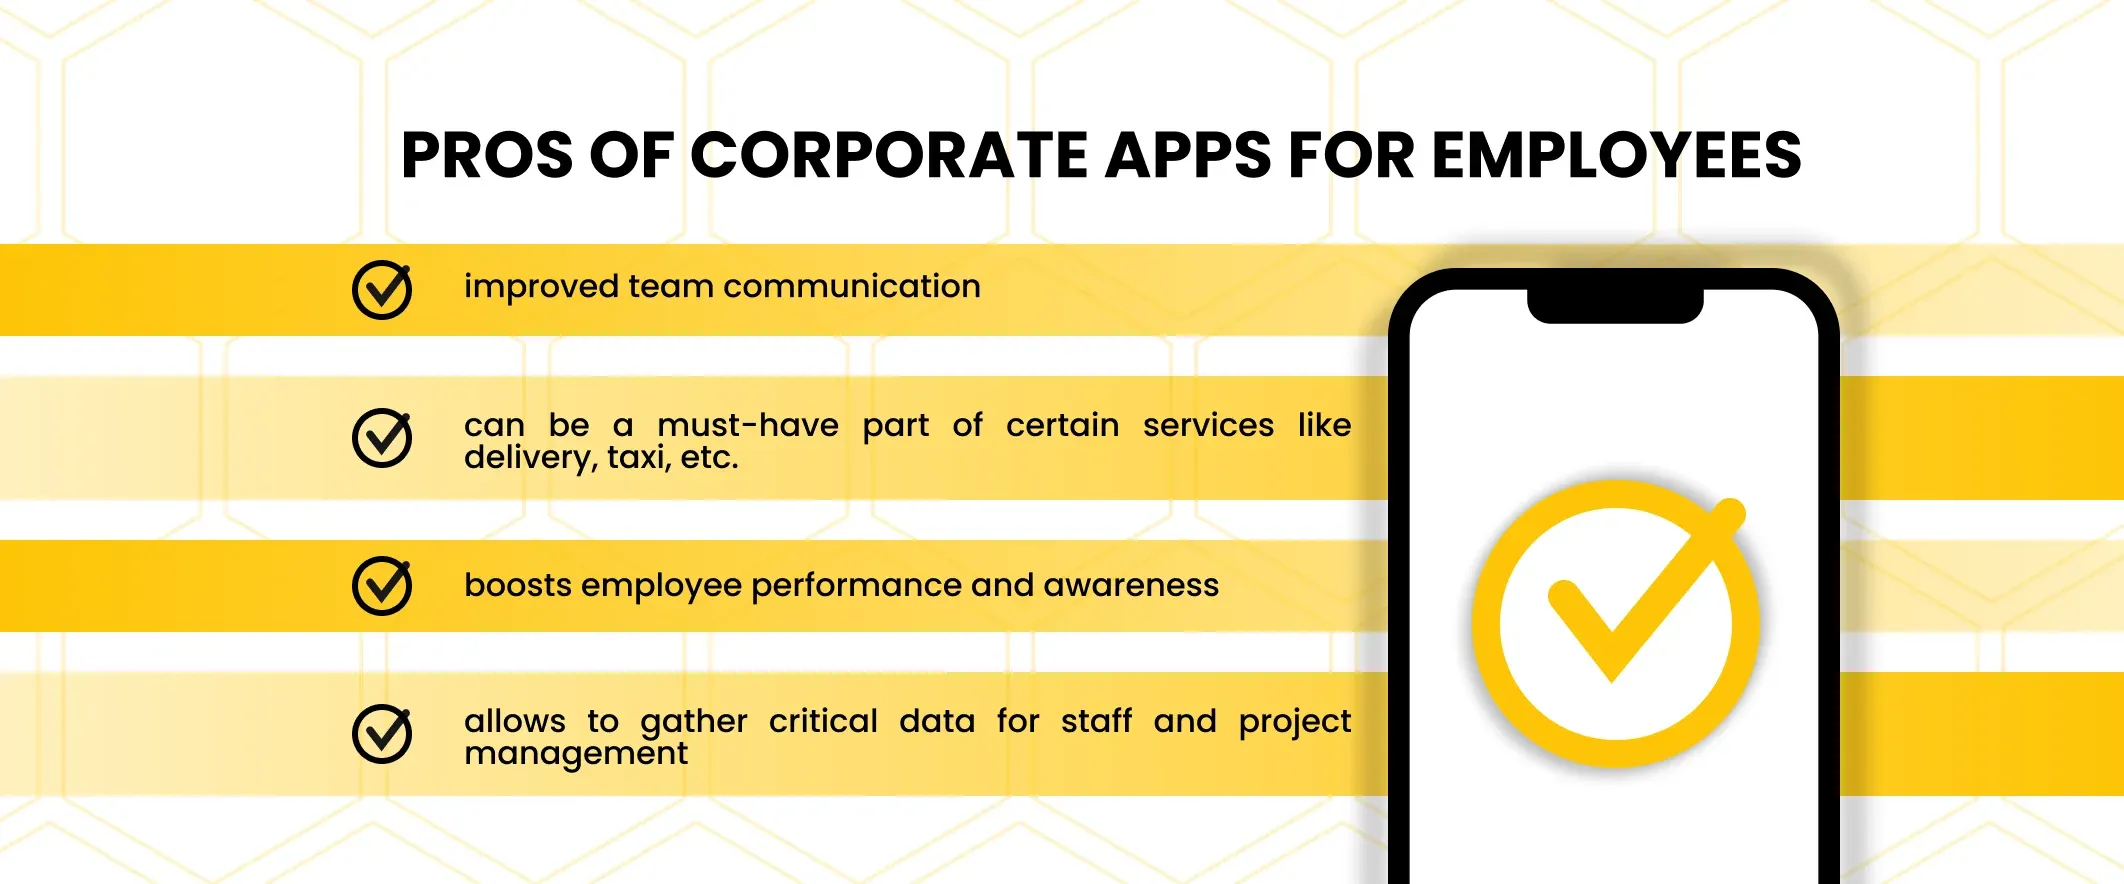 pros of corporate apps for employees